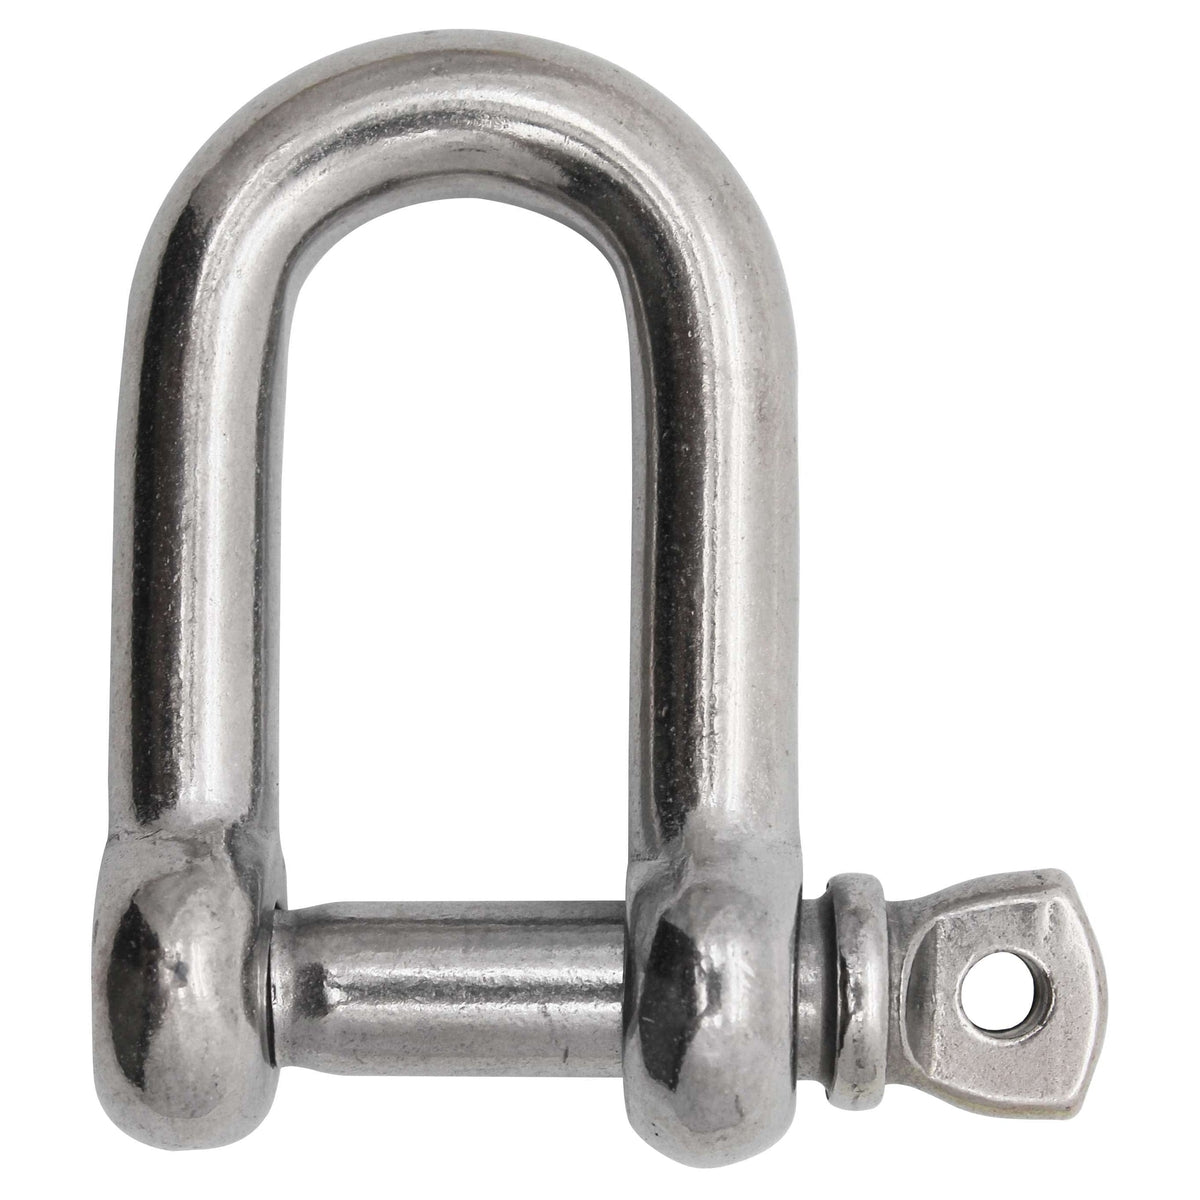 Extreme Max BoatTector SS D Shackle 5/8" #3006.8249